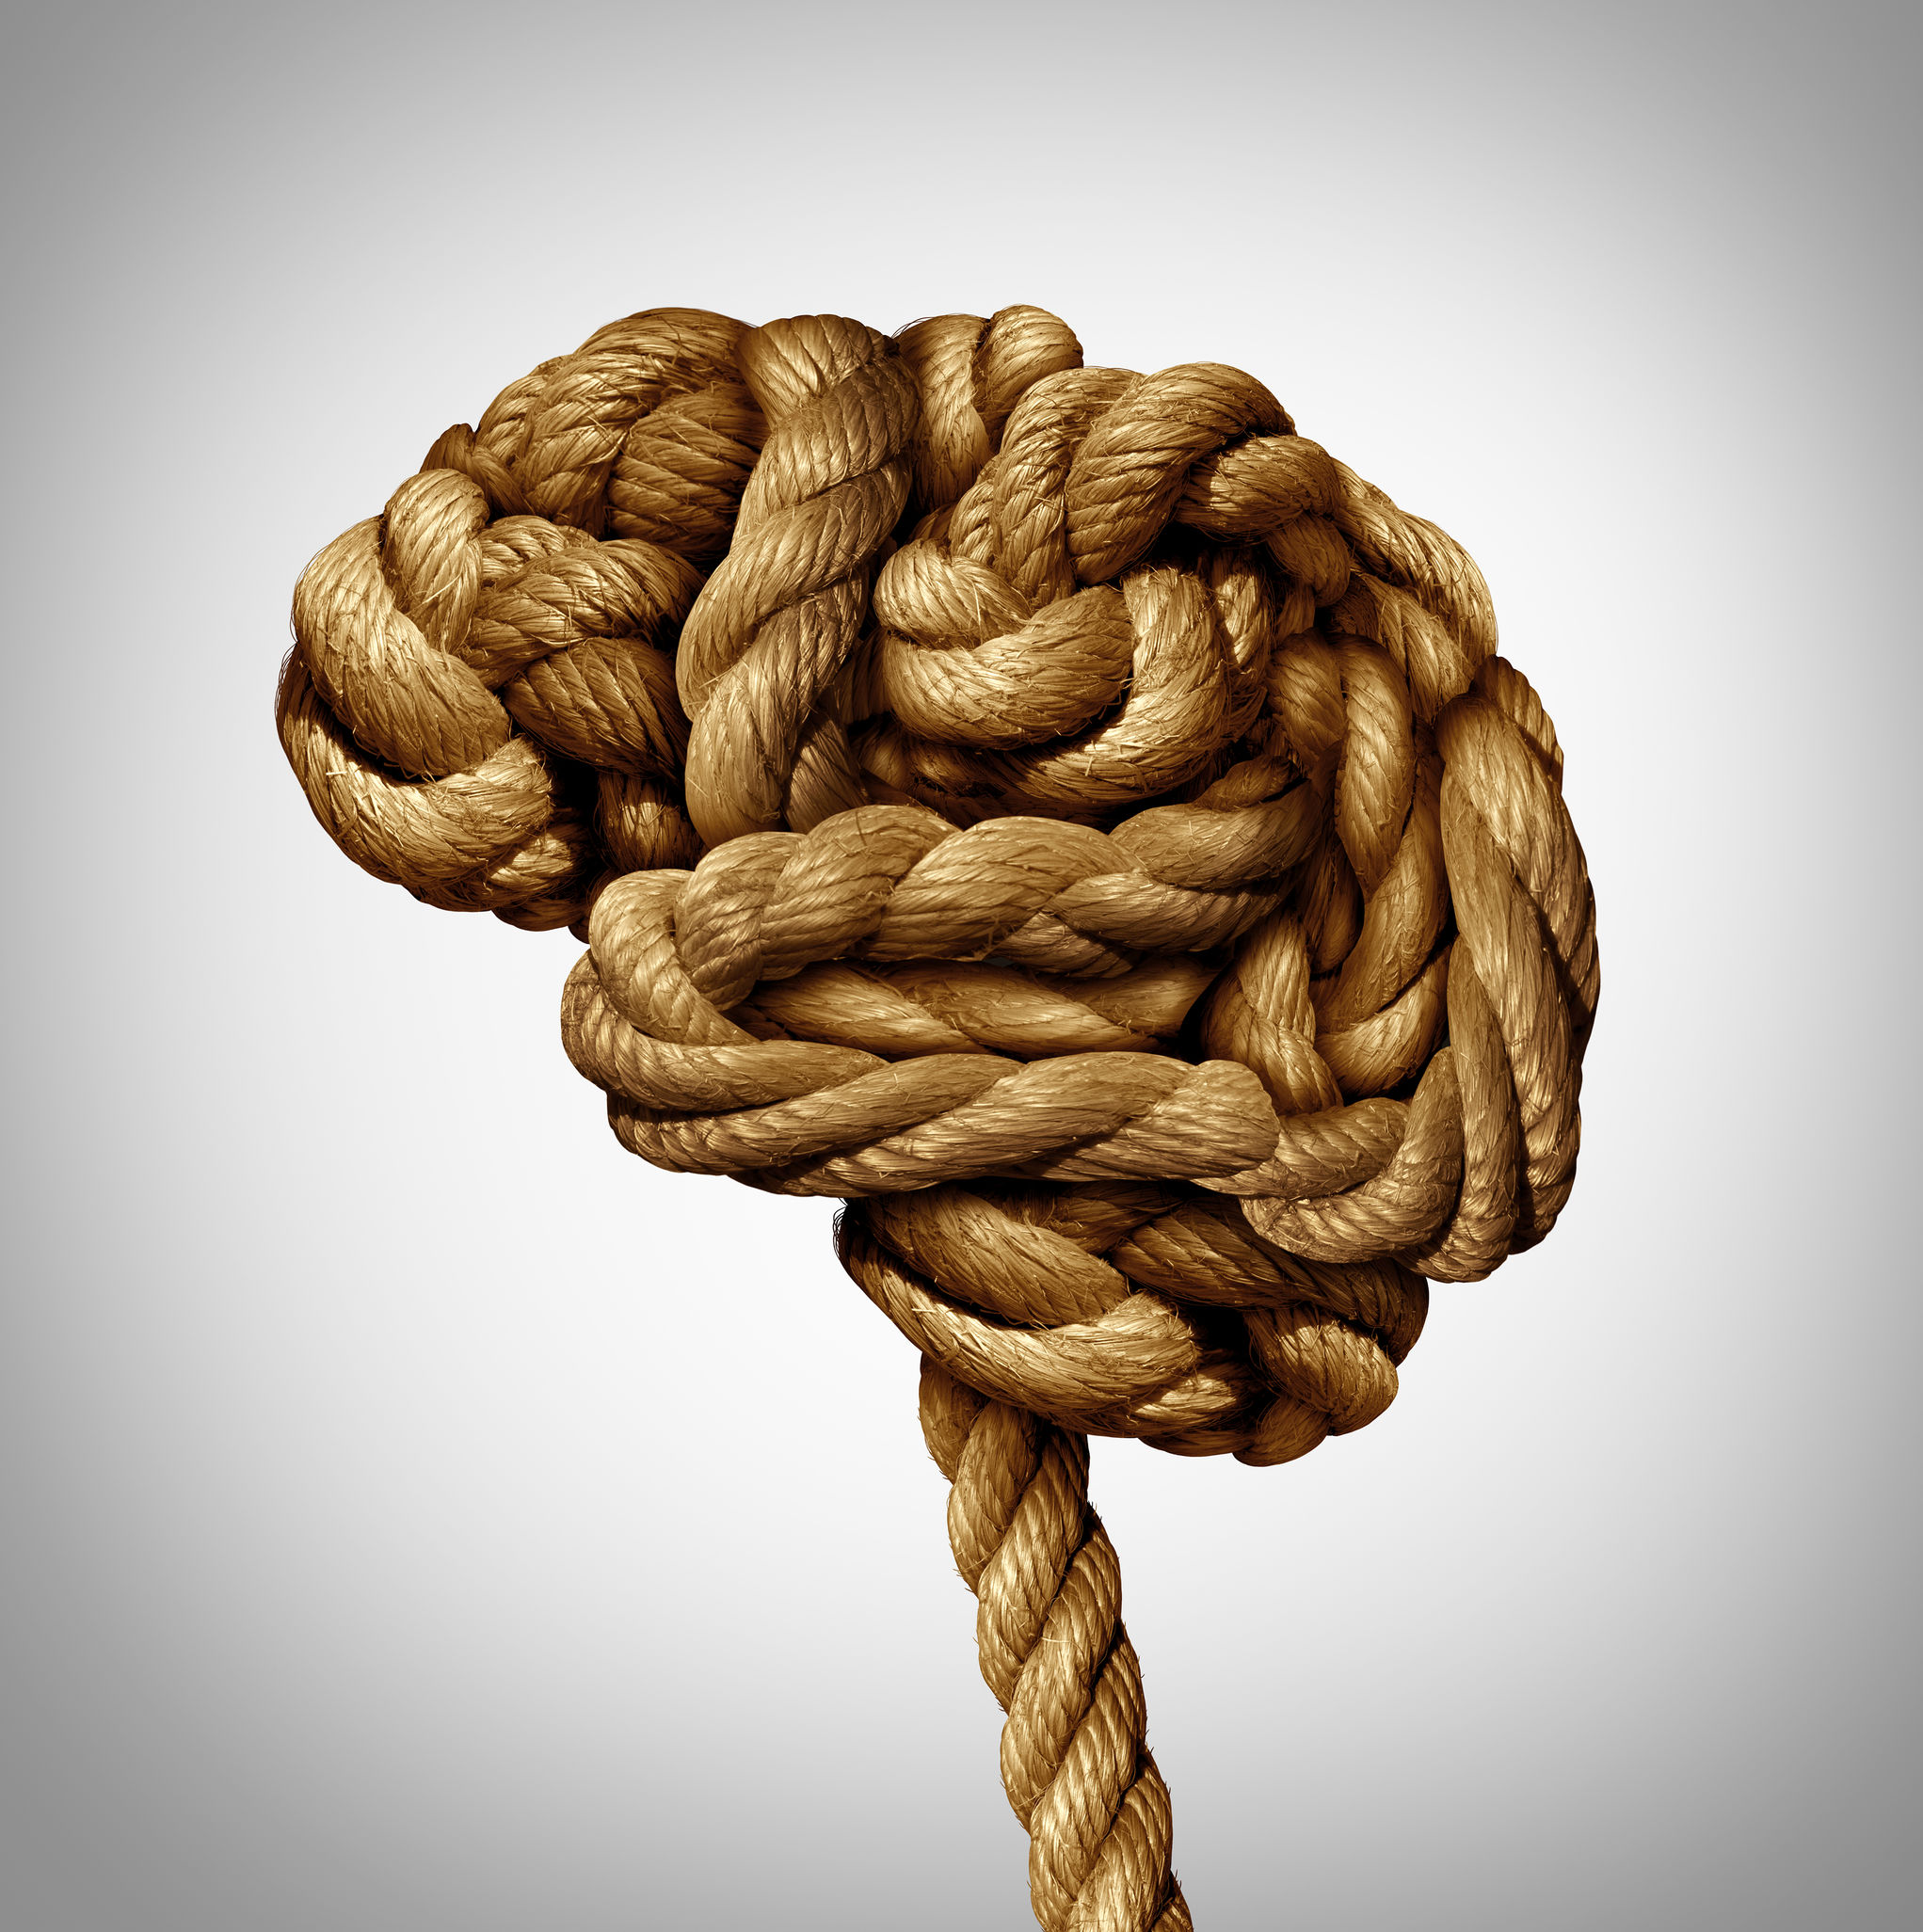 Tangled brain mental health concept as a rope twisted into a human thinking organ as a medical neurological symbol for mind function or diseases as dementia or autism.